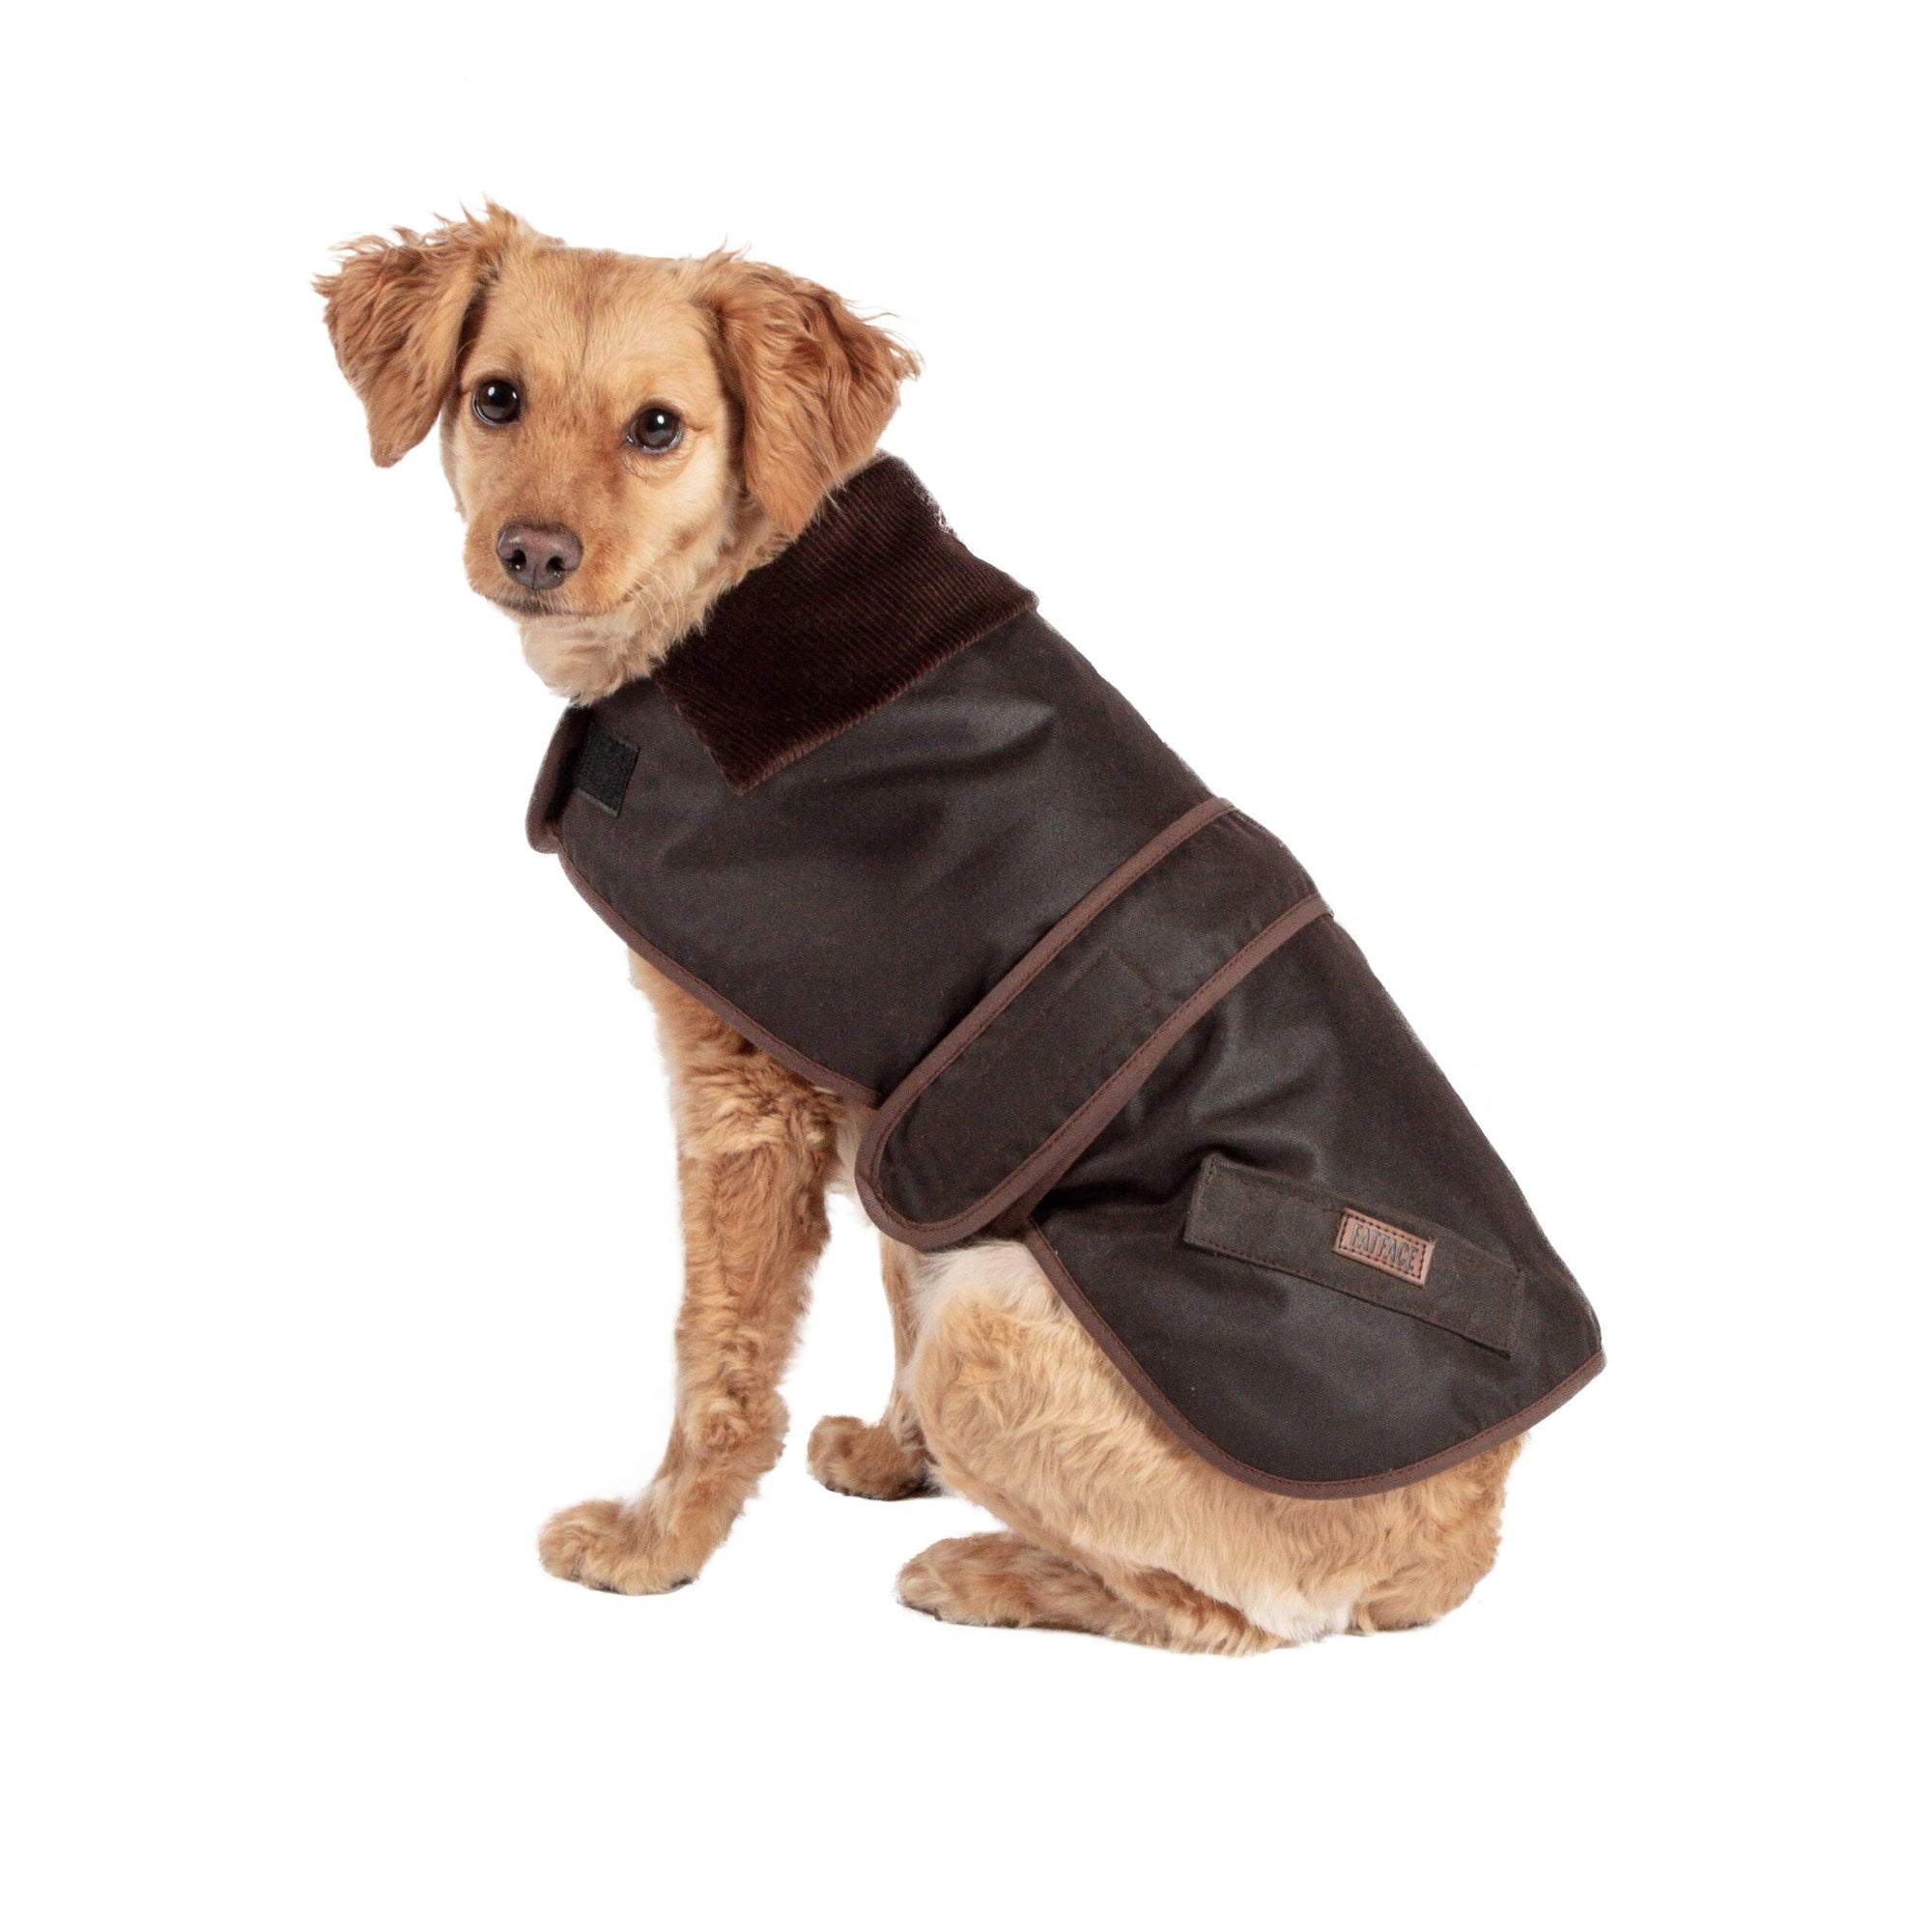 FatFace Susssex Wax Dog Coat at £27.99